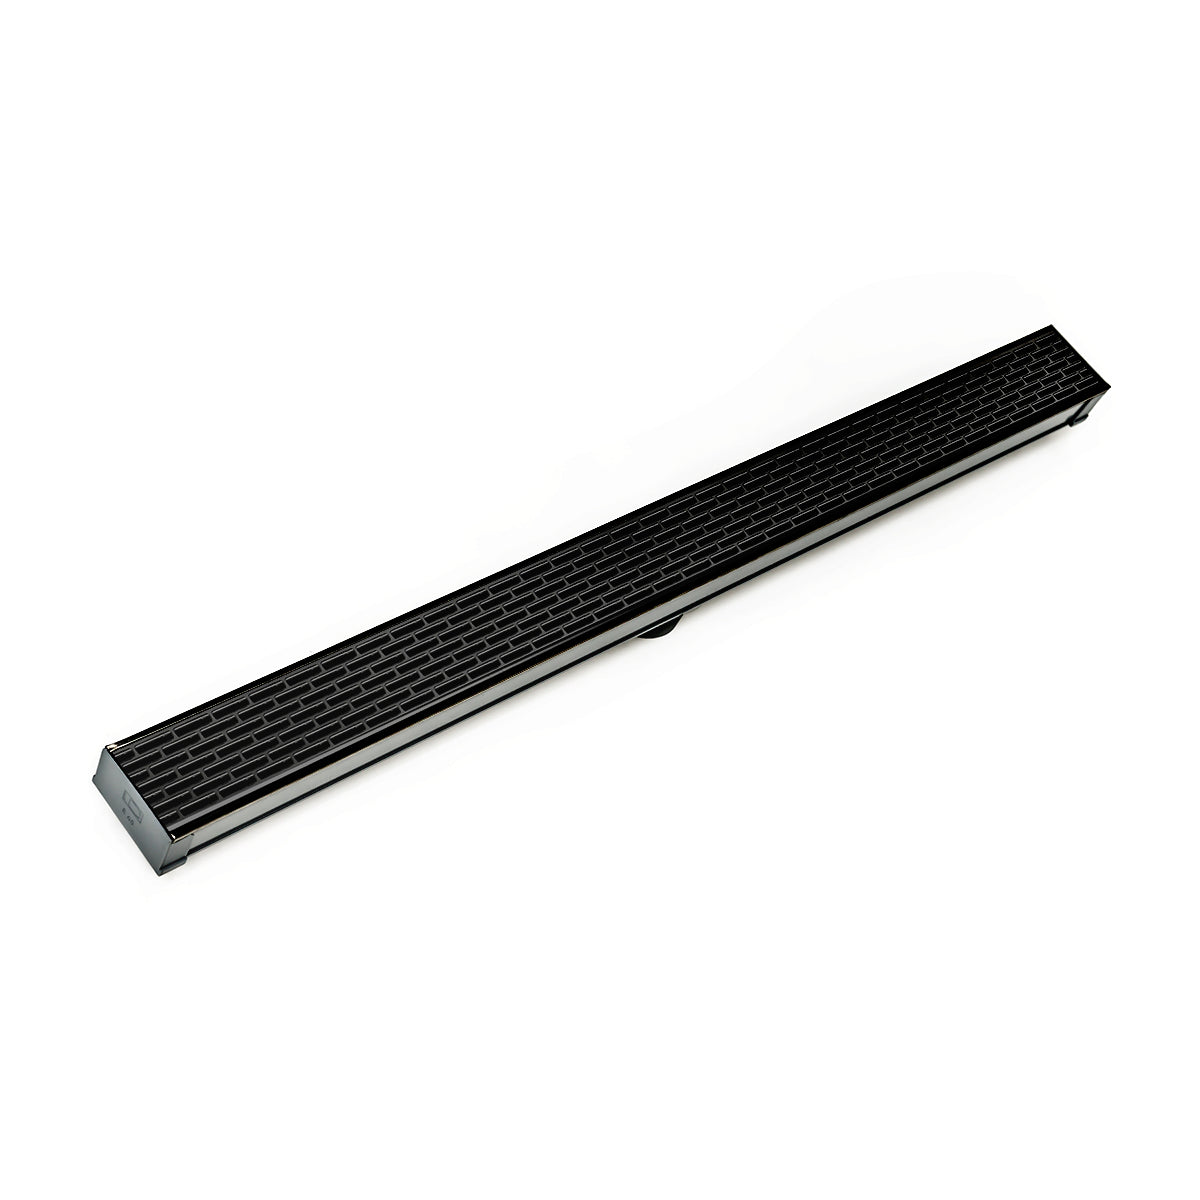 Infinity Drain 36" S-PVC Series Low Profile Site Sizable Linear Drain Kit with 2 1/2" Perforated Offset Slot Grate